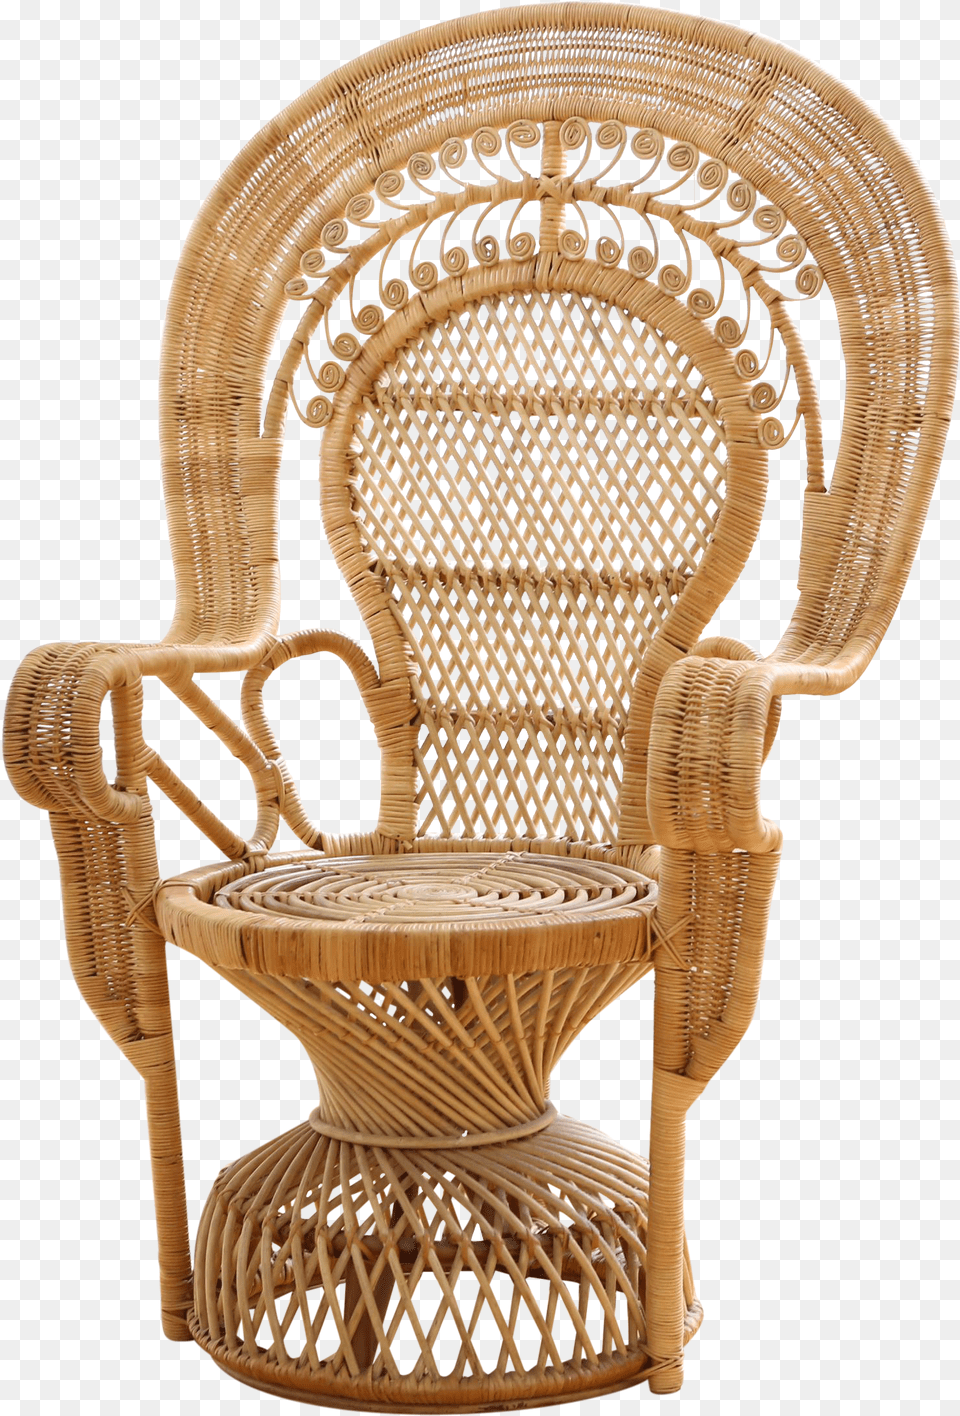 Vintage Rattan And Wicker Peacock Chair Free Transparent Png